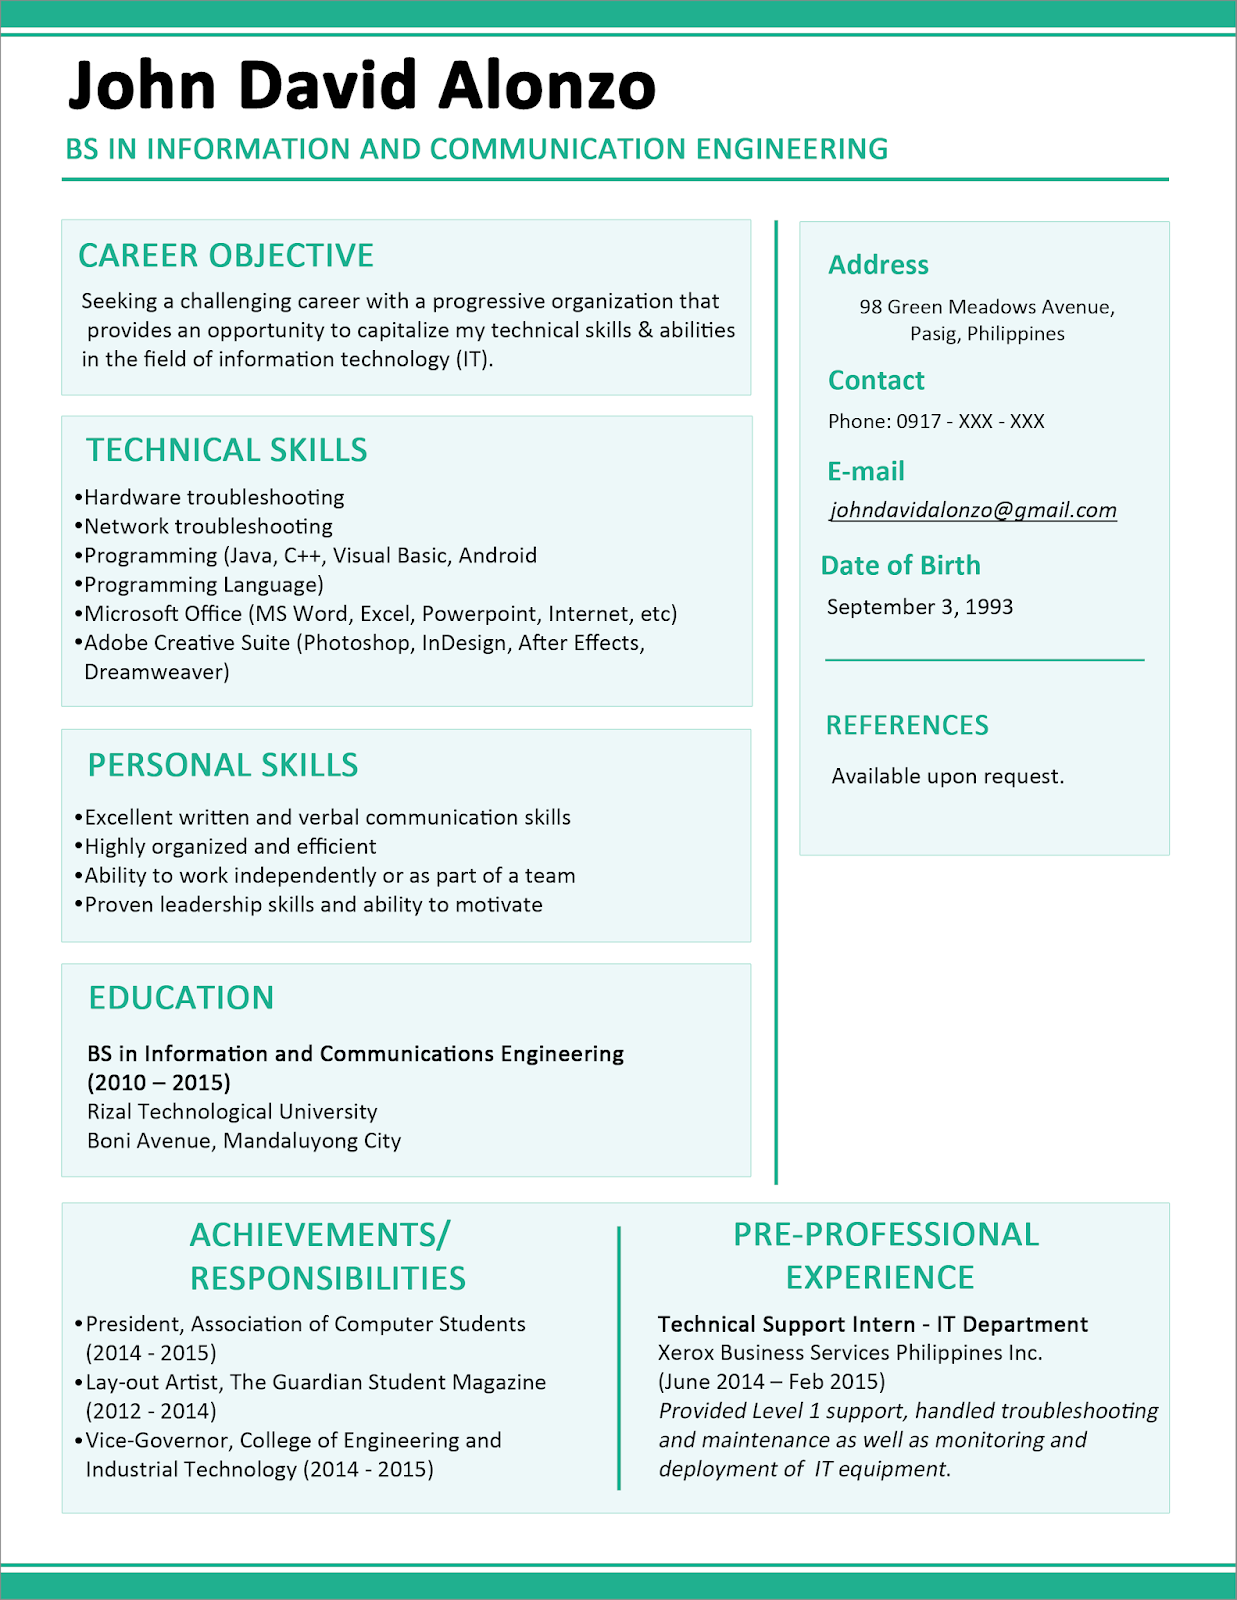 image of a resume cover letter 2019 image resize upload image of a good resume 2020 image sample of a resume image of a simple resume image of a professional resume image of a basic resume image of a job resume example